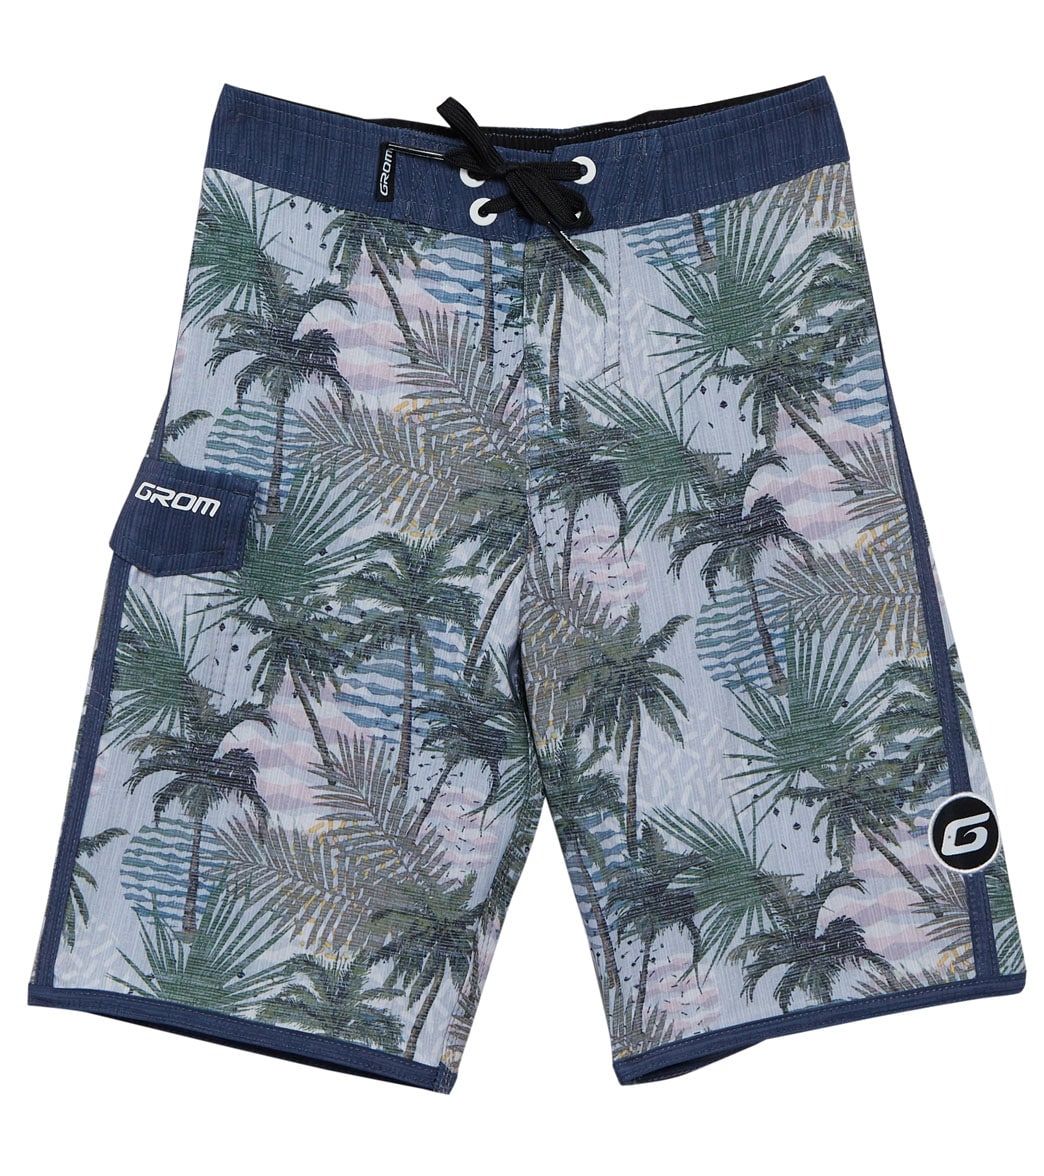 Grom Boys' Classic Boardshorts Toddler/Little/Big Kid - Navy X-Small 4/5 - Swimoutlet.com